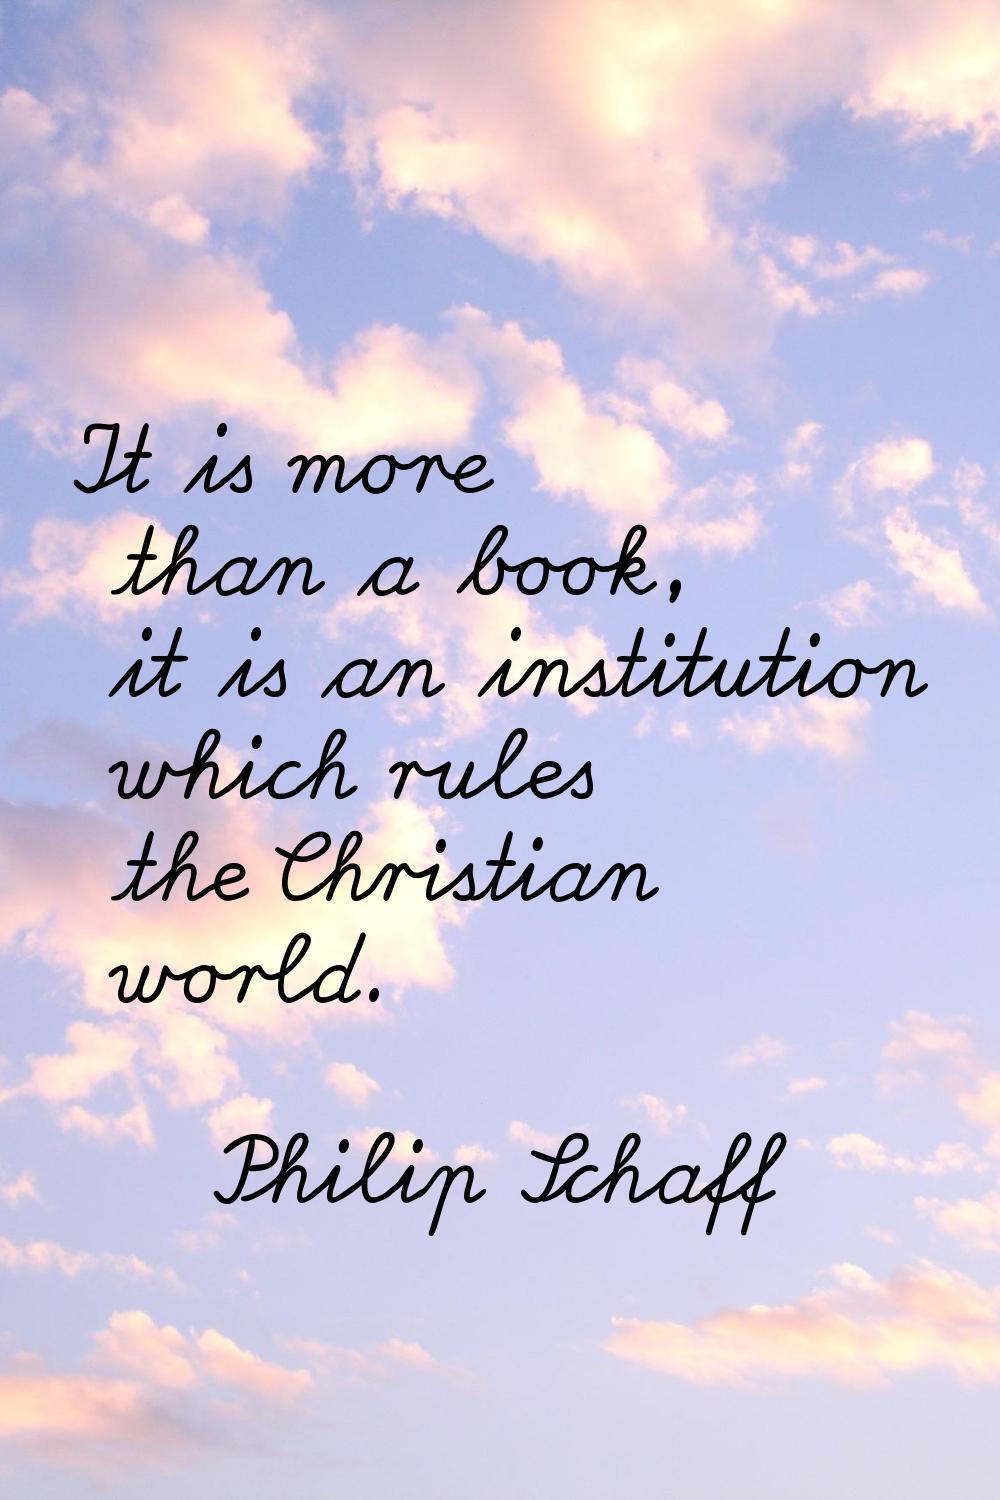 It is more than a book, it is an institution which rules the Christian world.